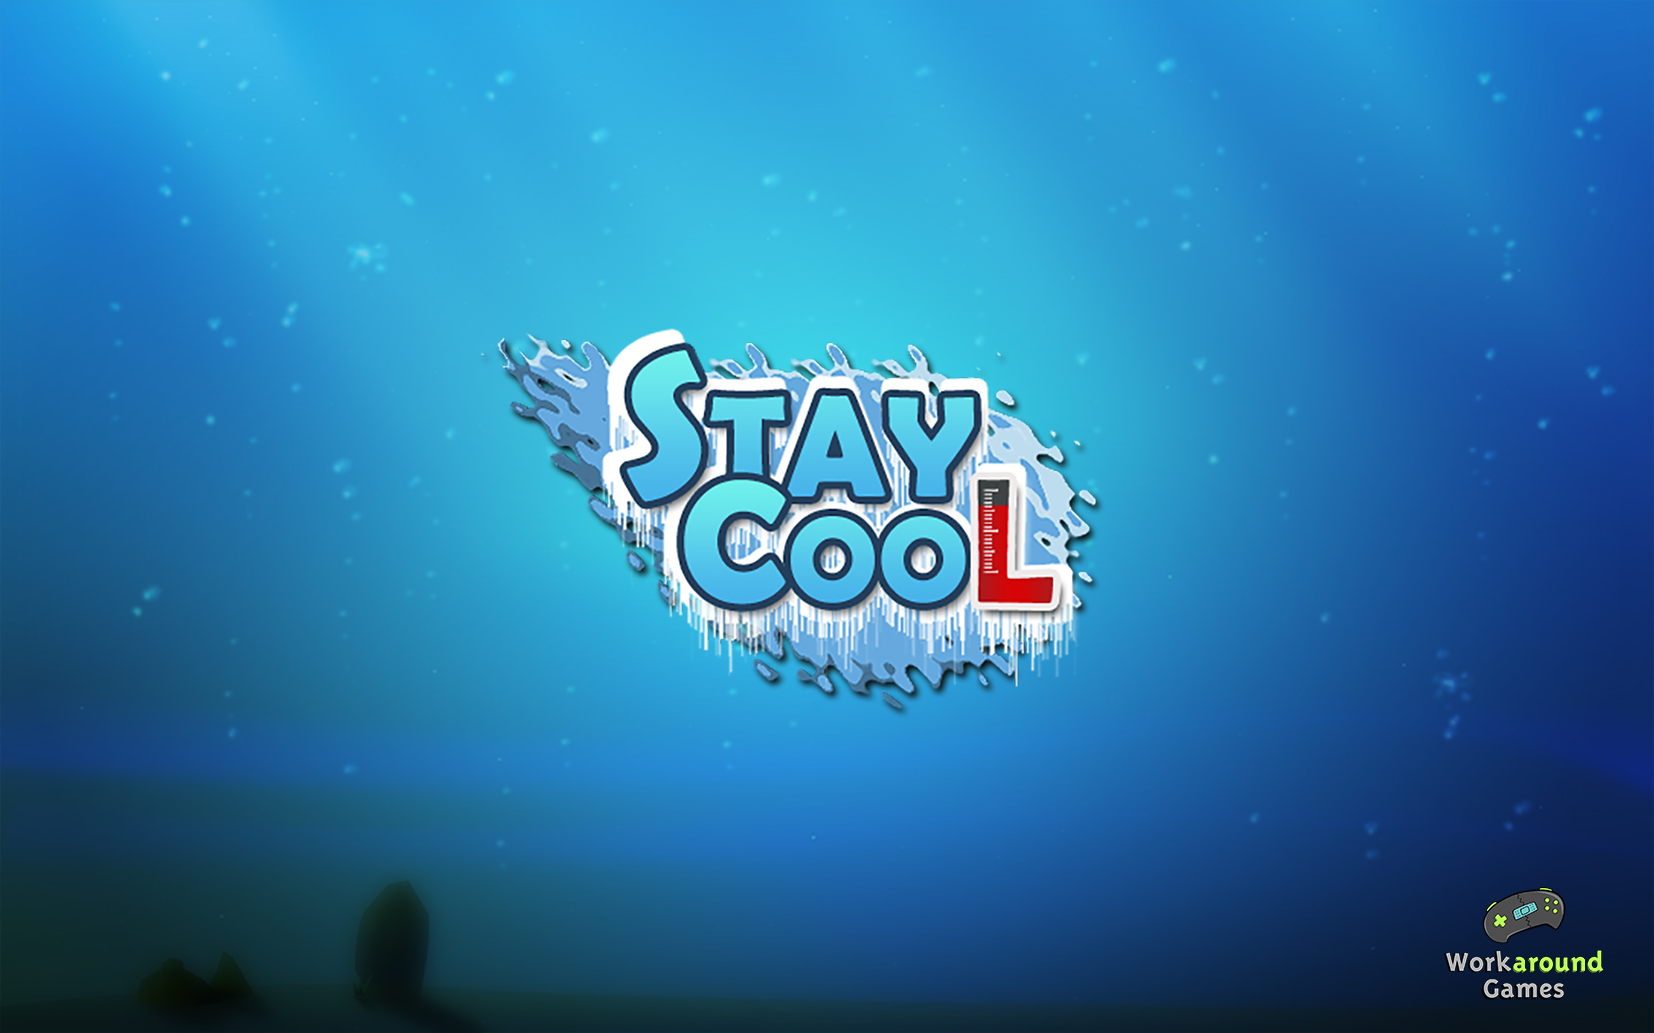 Stay Cool image